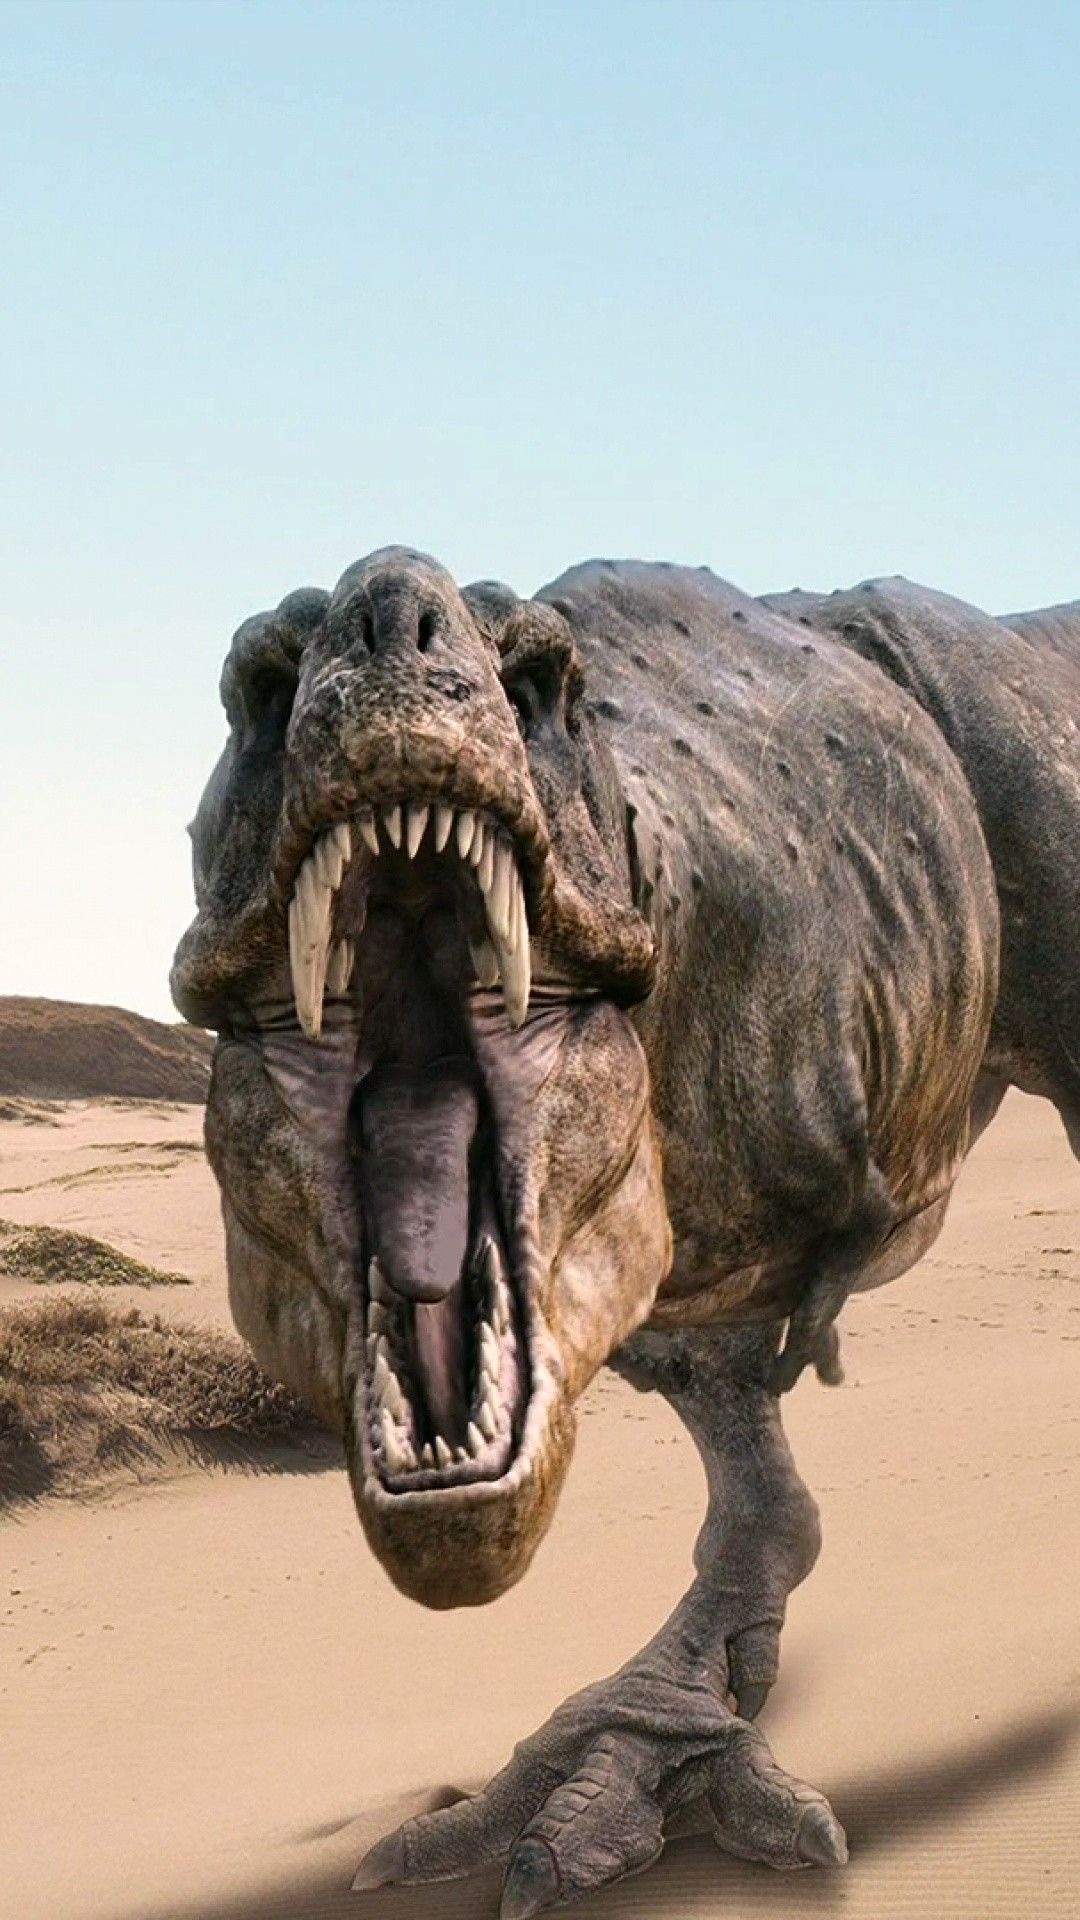 High-quality images, Fascinating dinosaurs, Download wallpapers, Dinosaur enthusiasts, 1080x1920 Full HD Handy